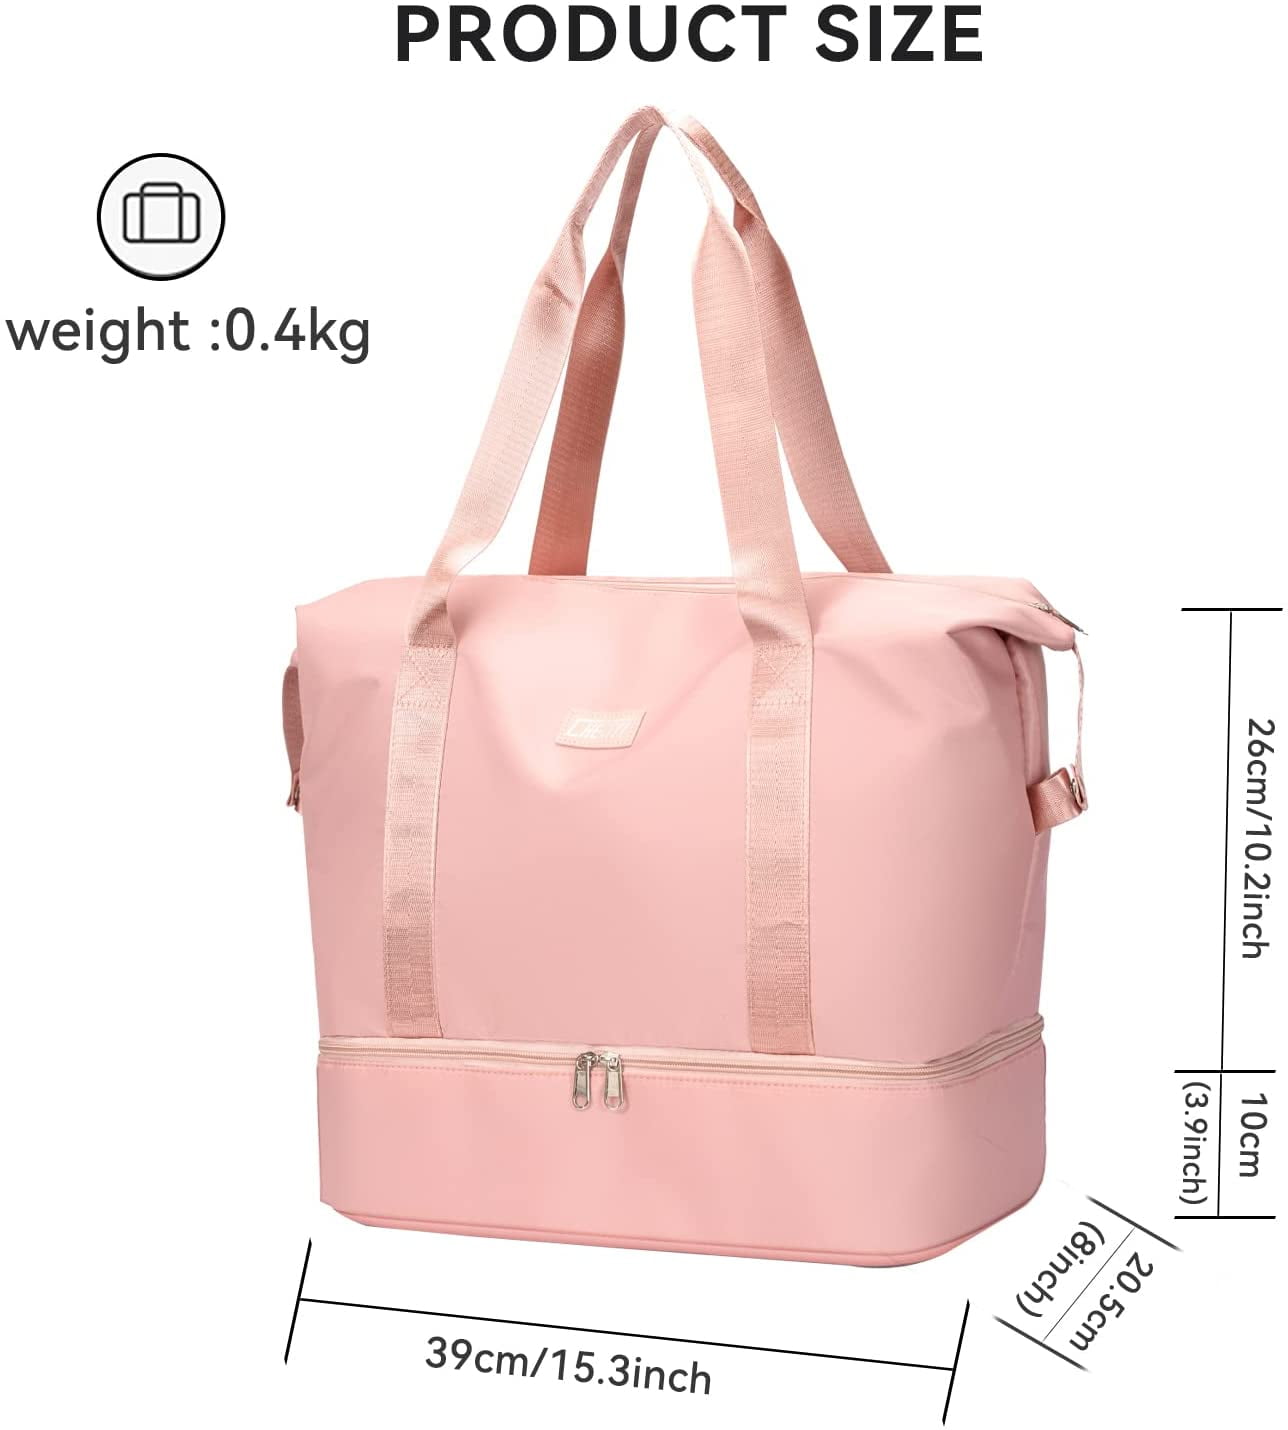 Weekend bag for Women Overnight Bag Large Travel Bag Carry on Weekend  Duffle Bag with Shoe Compartment Fit Perfect for